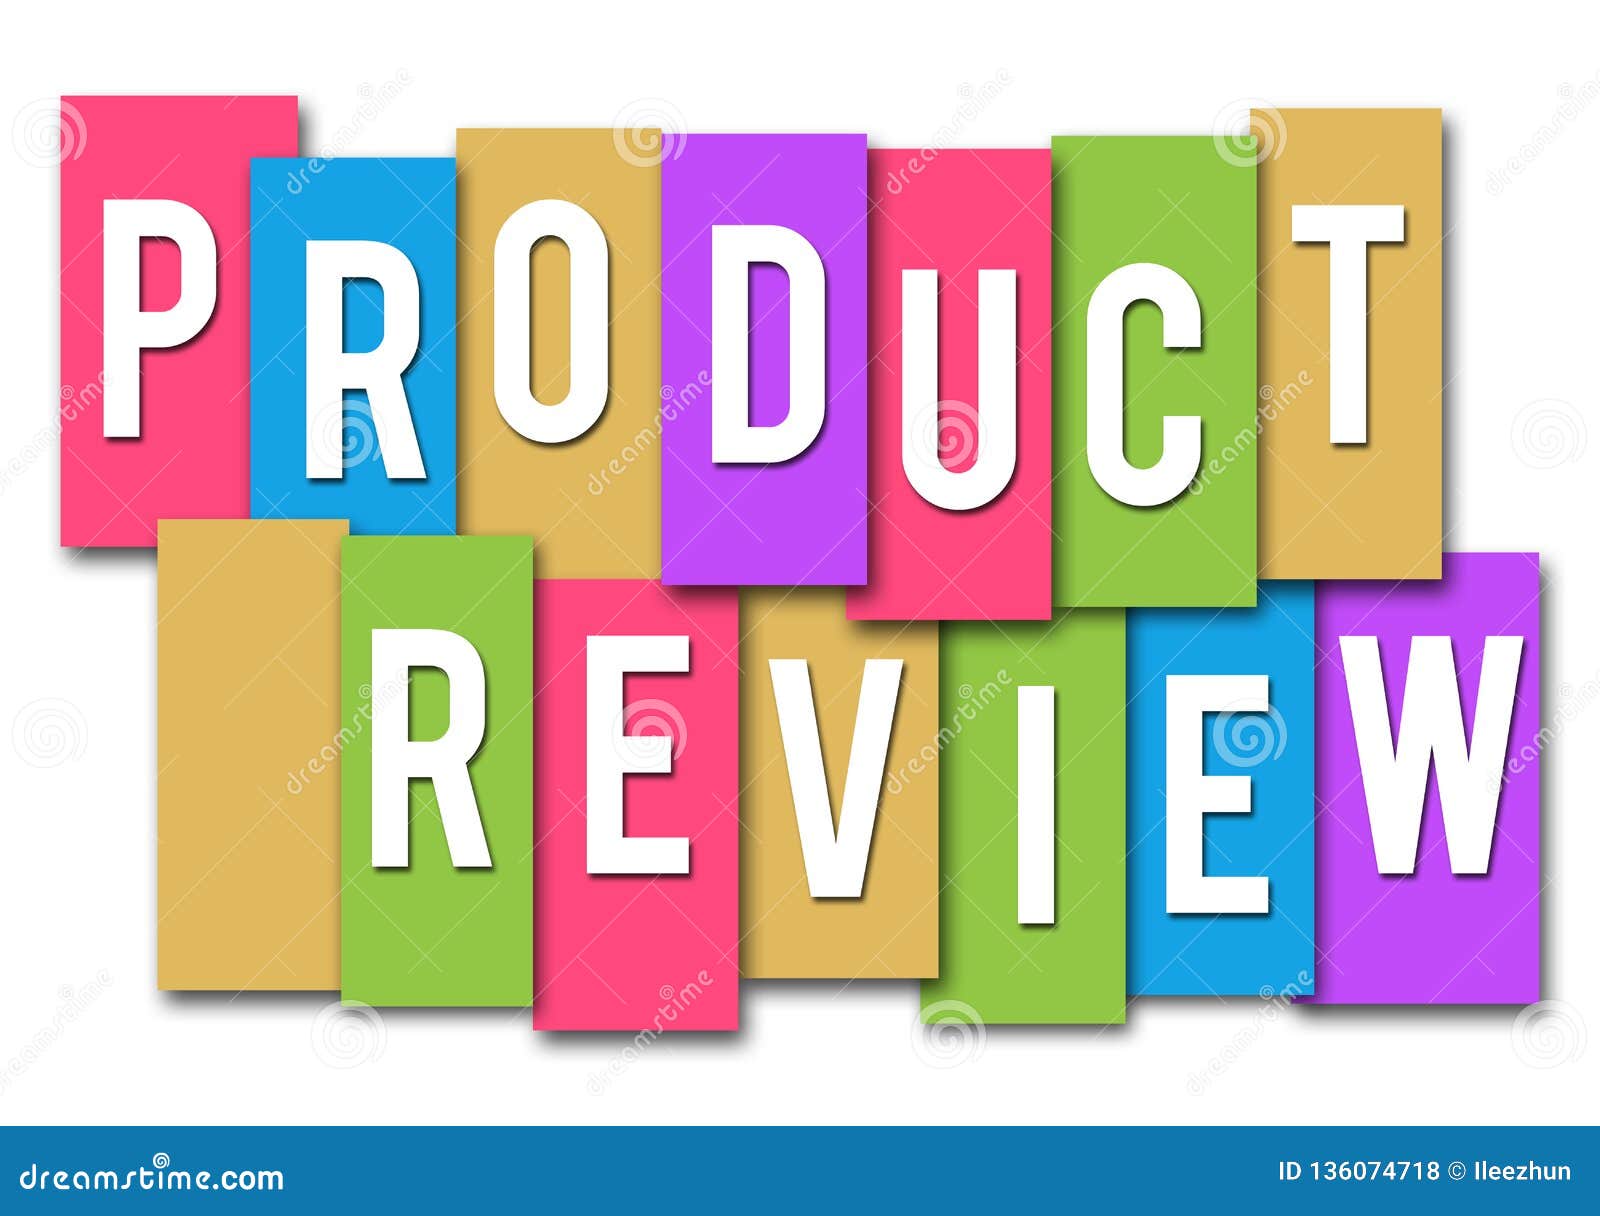 3 Tips for Encouraging Product Reviews - Practical Ecommerce